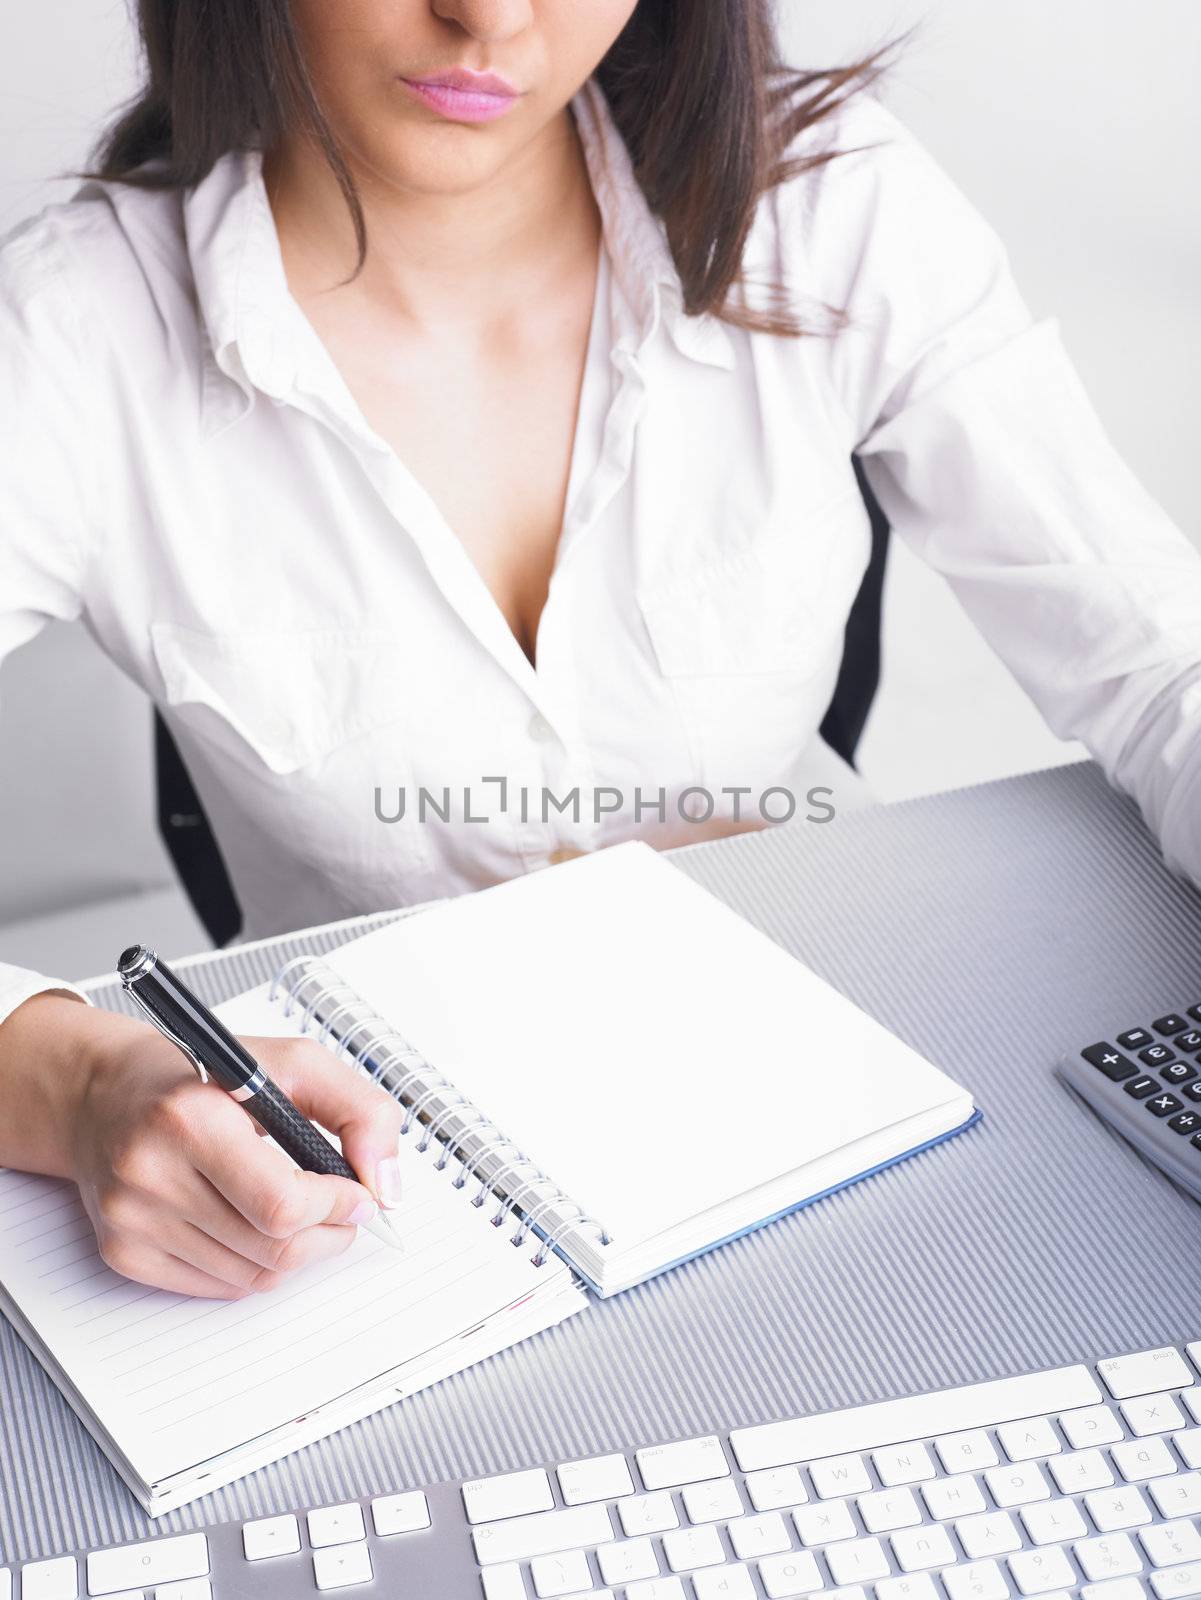 Office Assistant in white writing Schedule